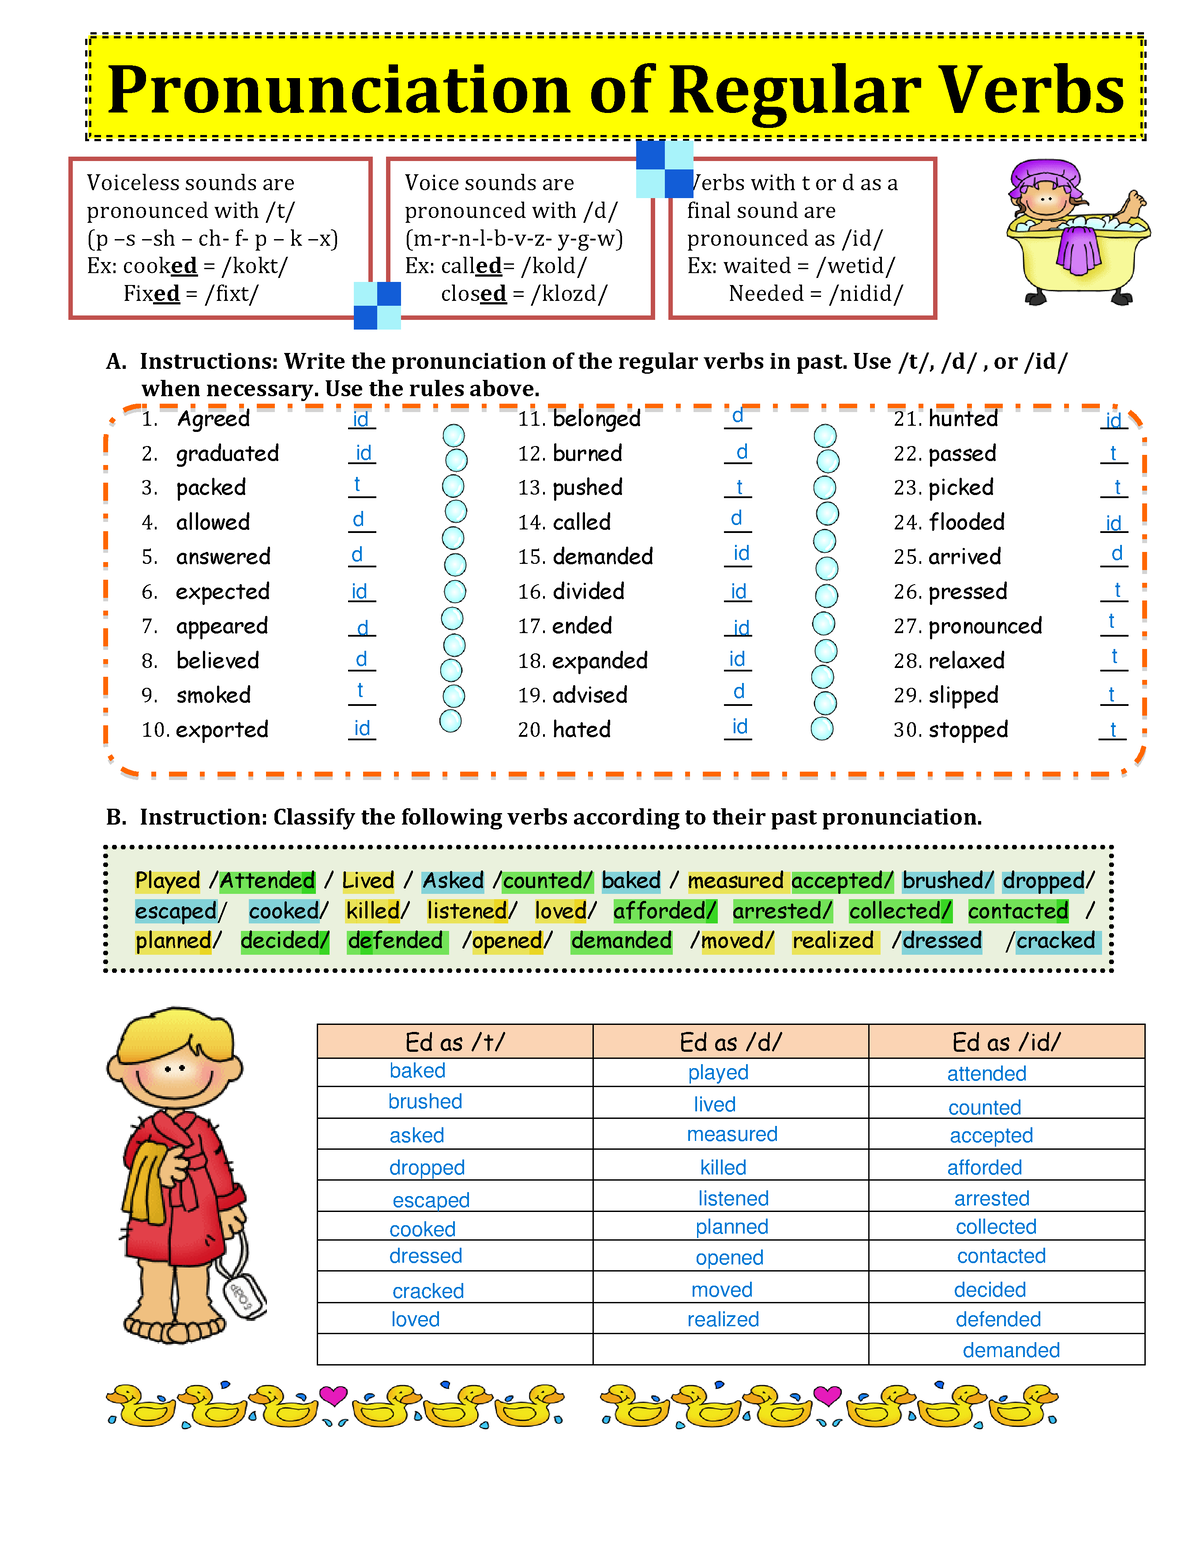 pronunciation-of-regular-verbs-in-the-simple-past-a-instructions